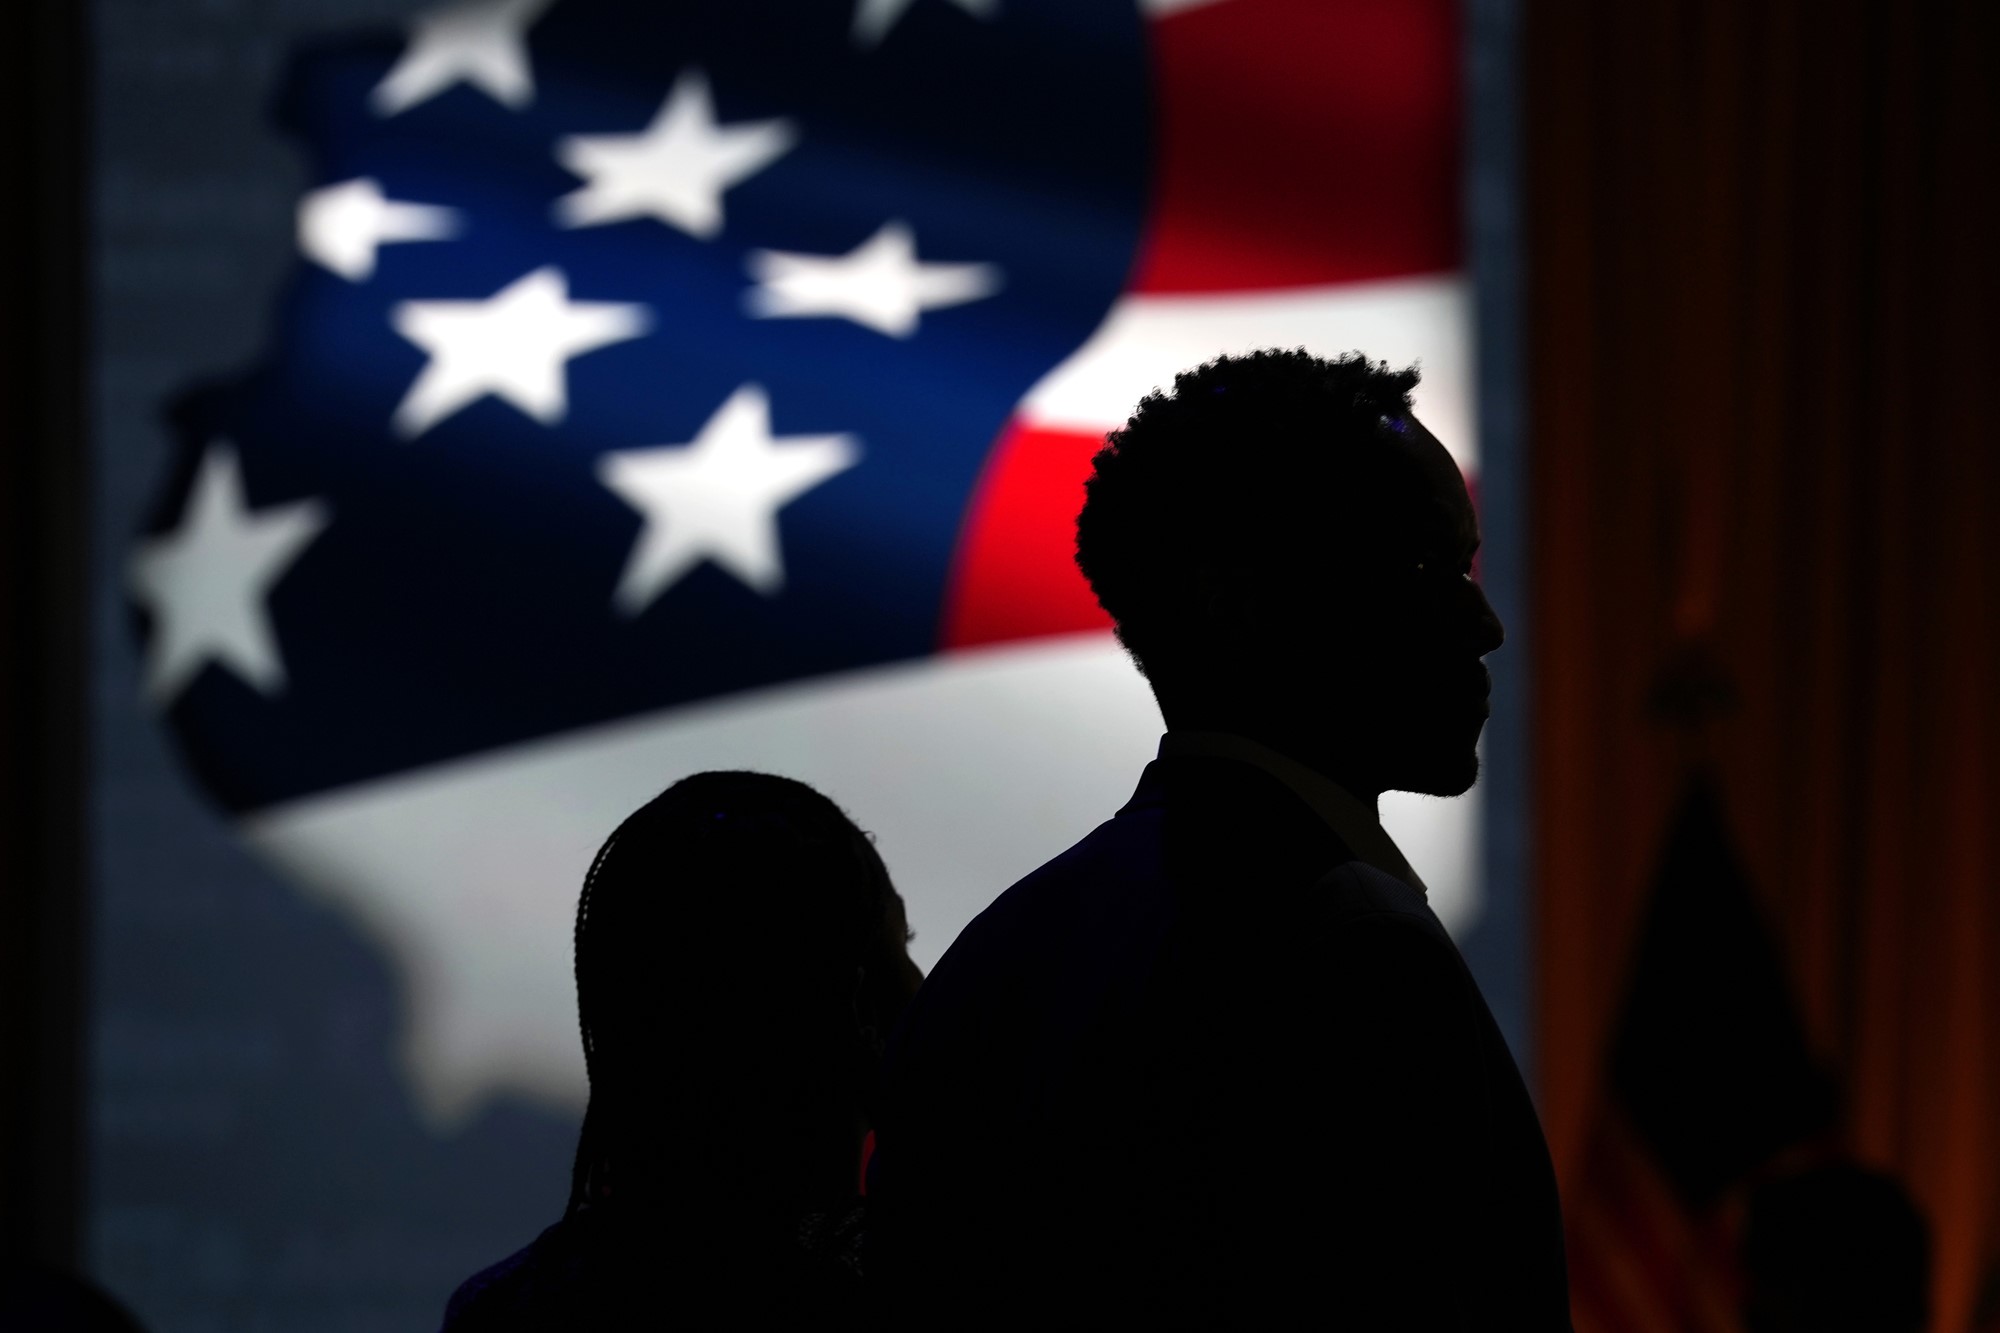 The silhouette of two people standing in front of the American flag.